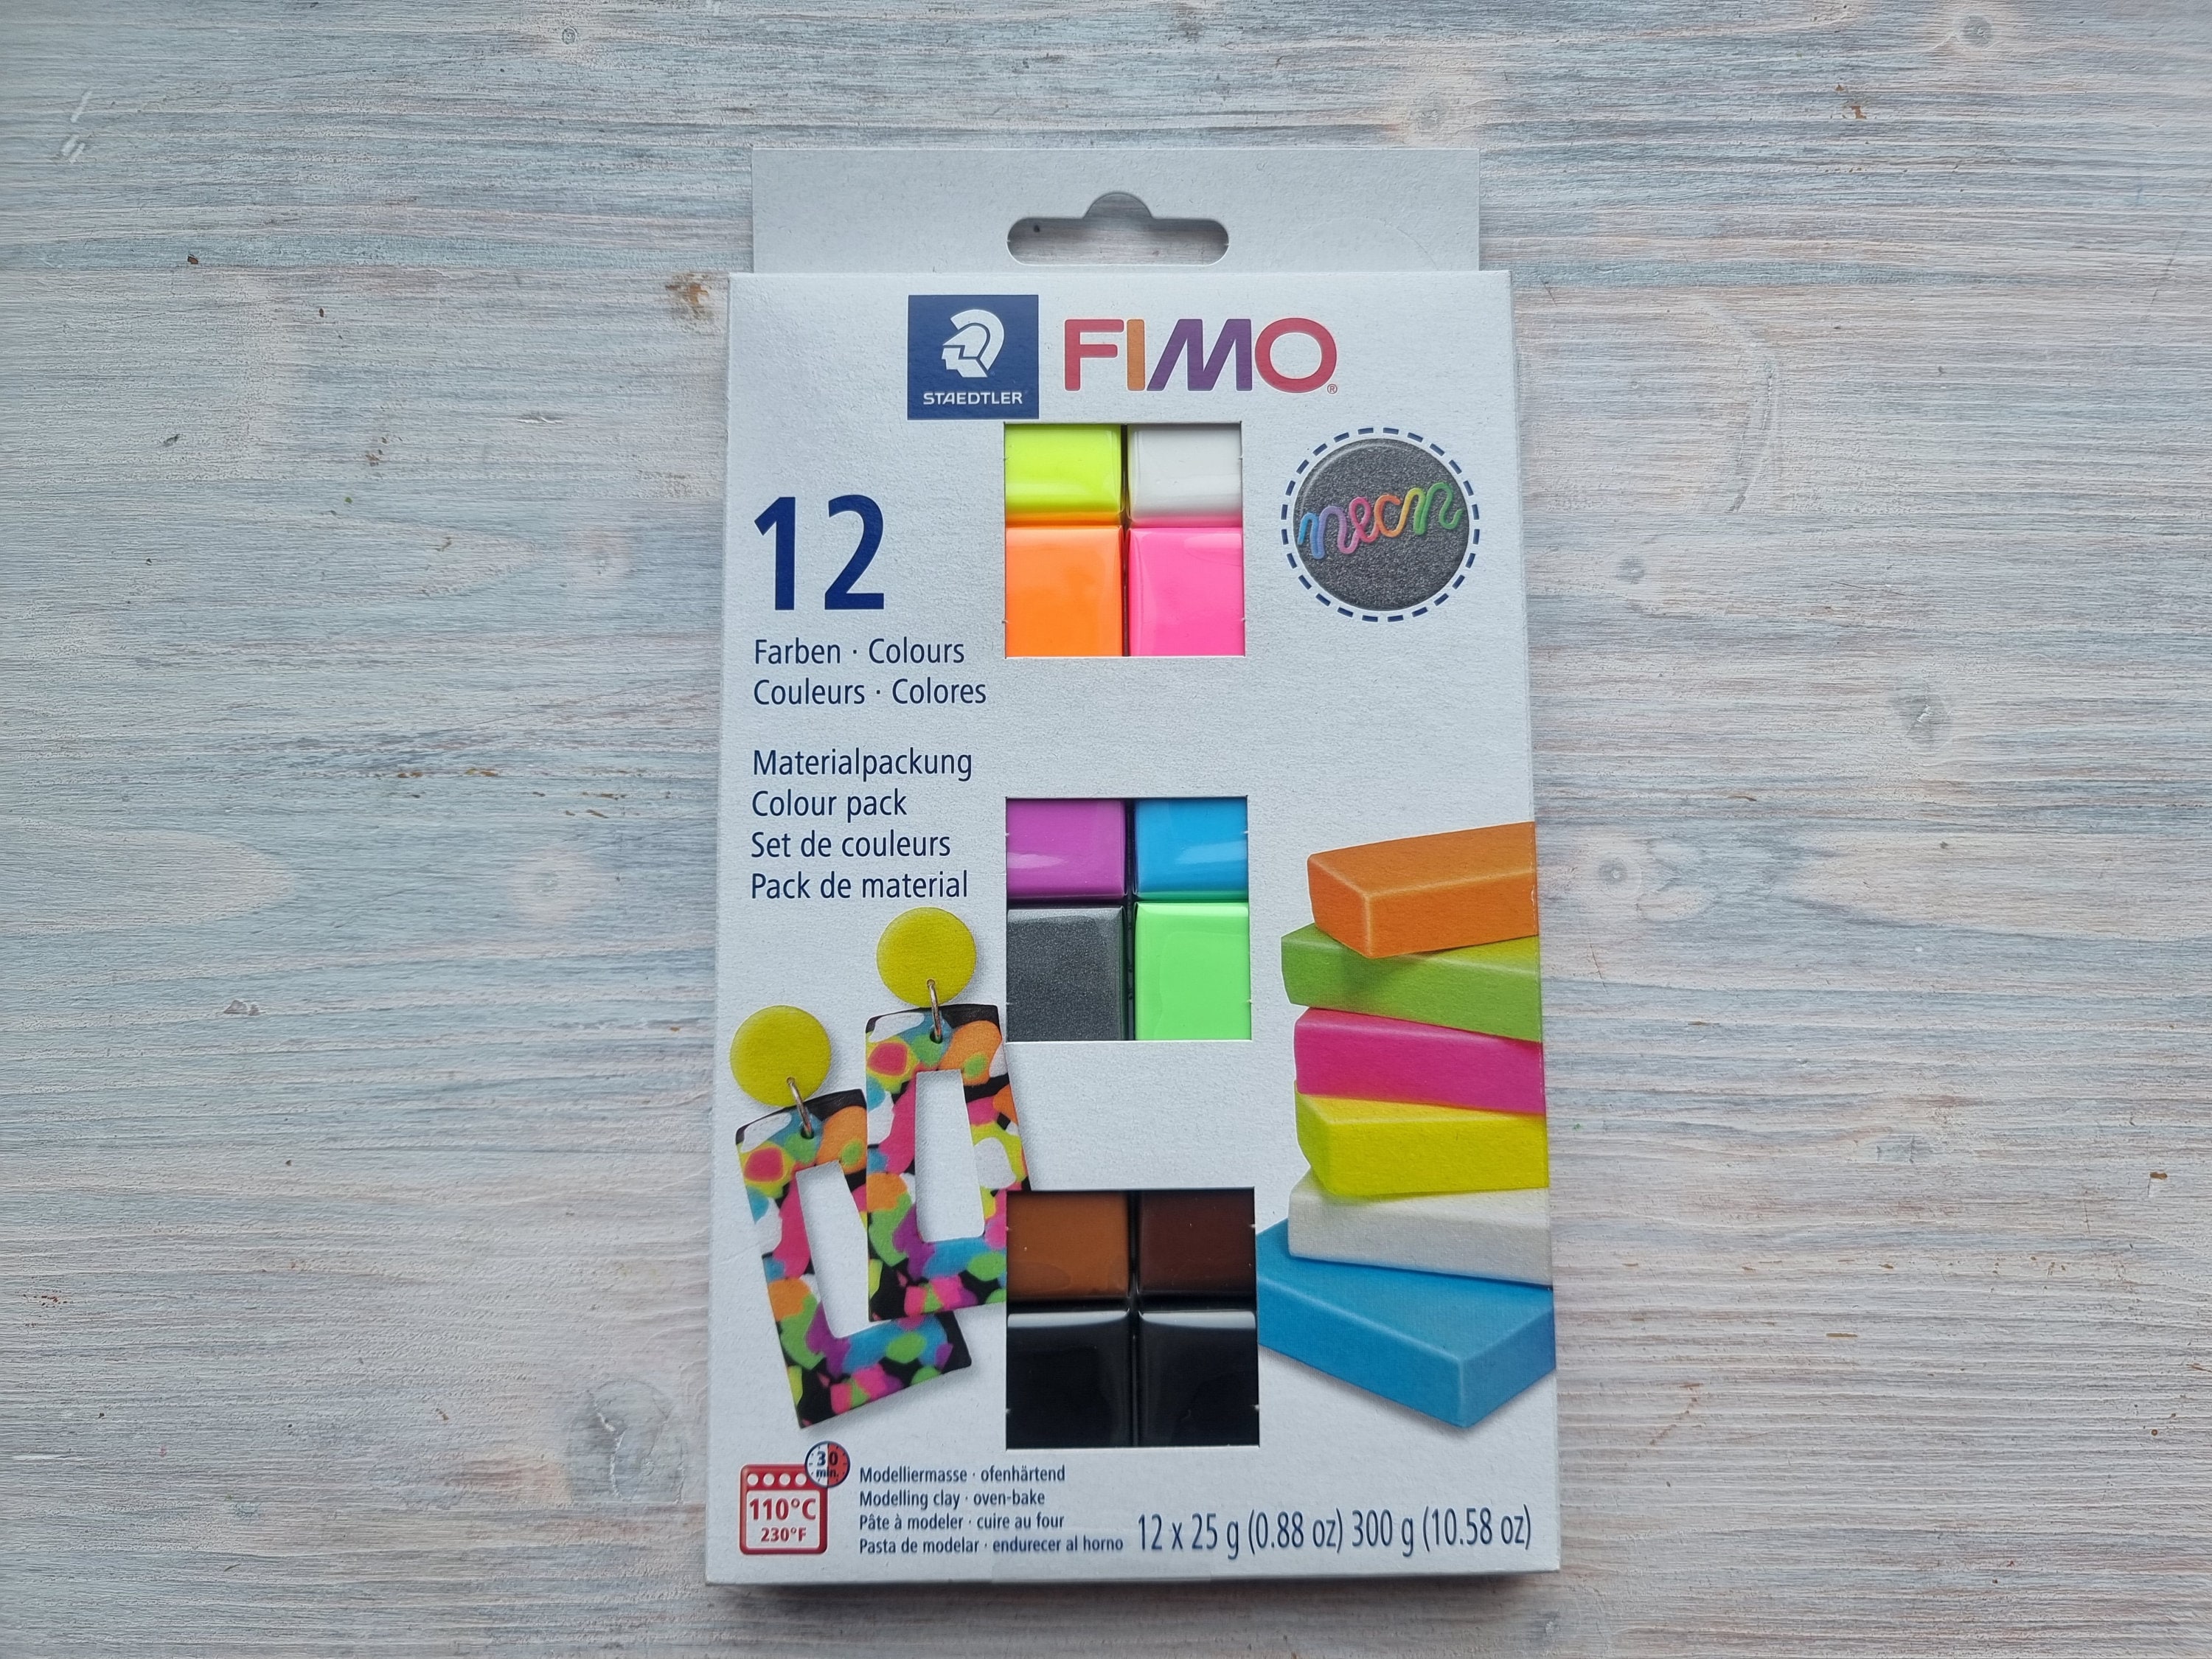 FIMO Soft Oven-bake Polymer Clay, White, Nr. 0, True Colours